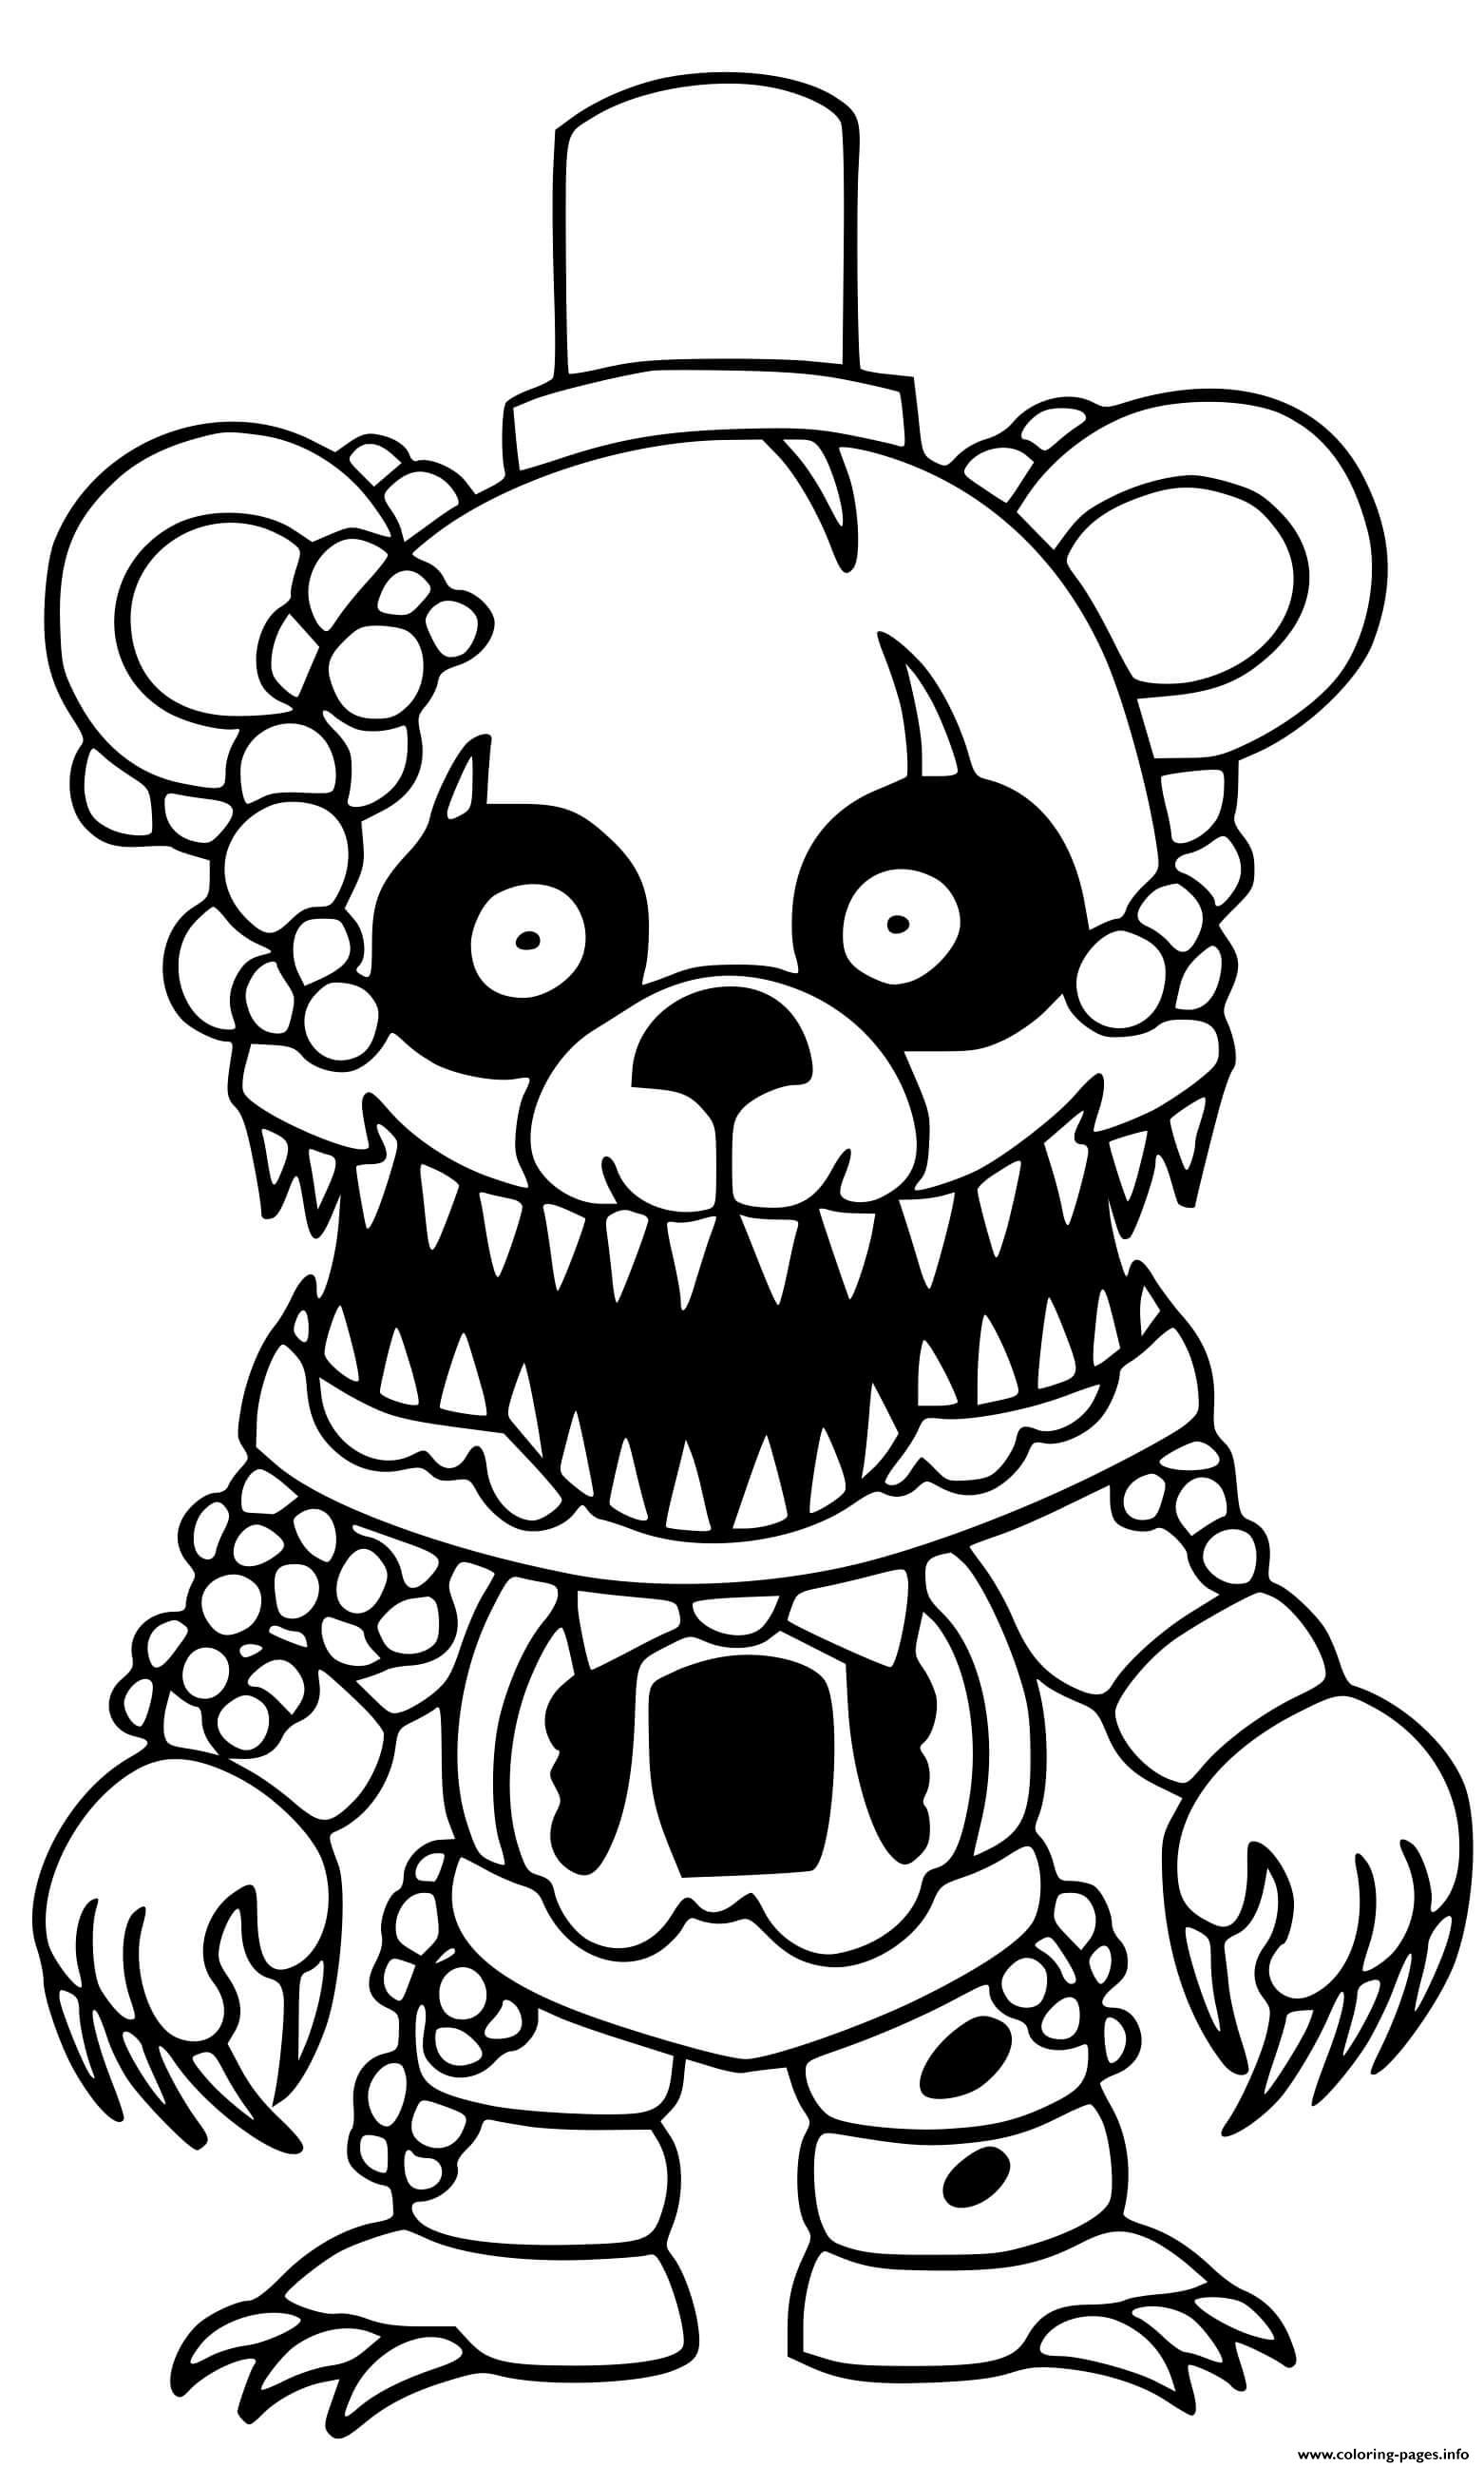 Printable Five Nights At Freddy S Coloring Pages The Best Porn Website